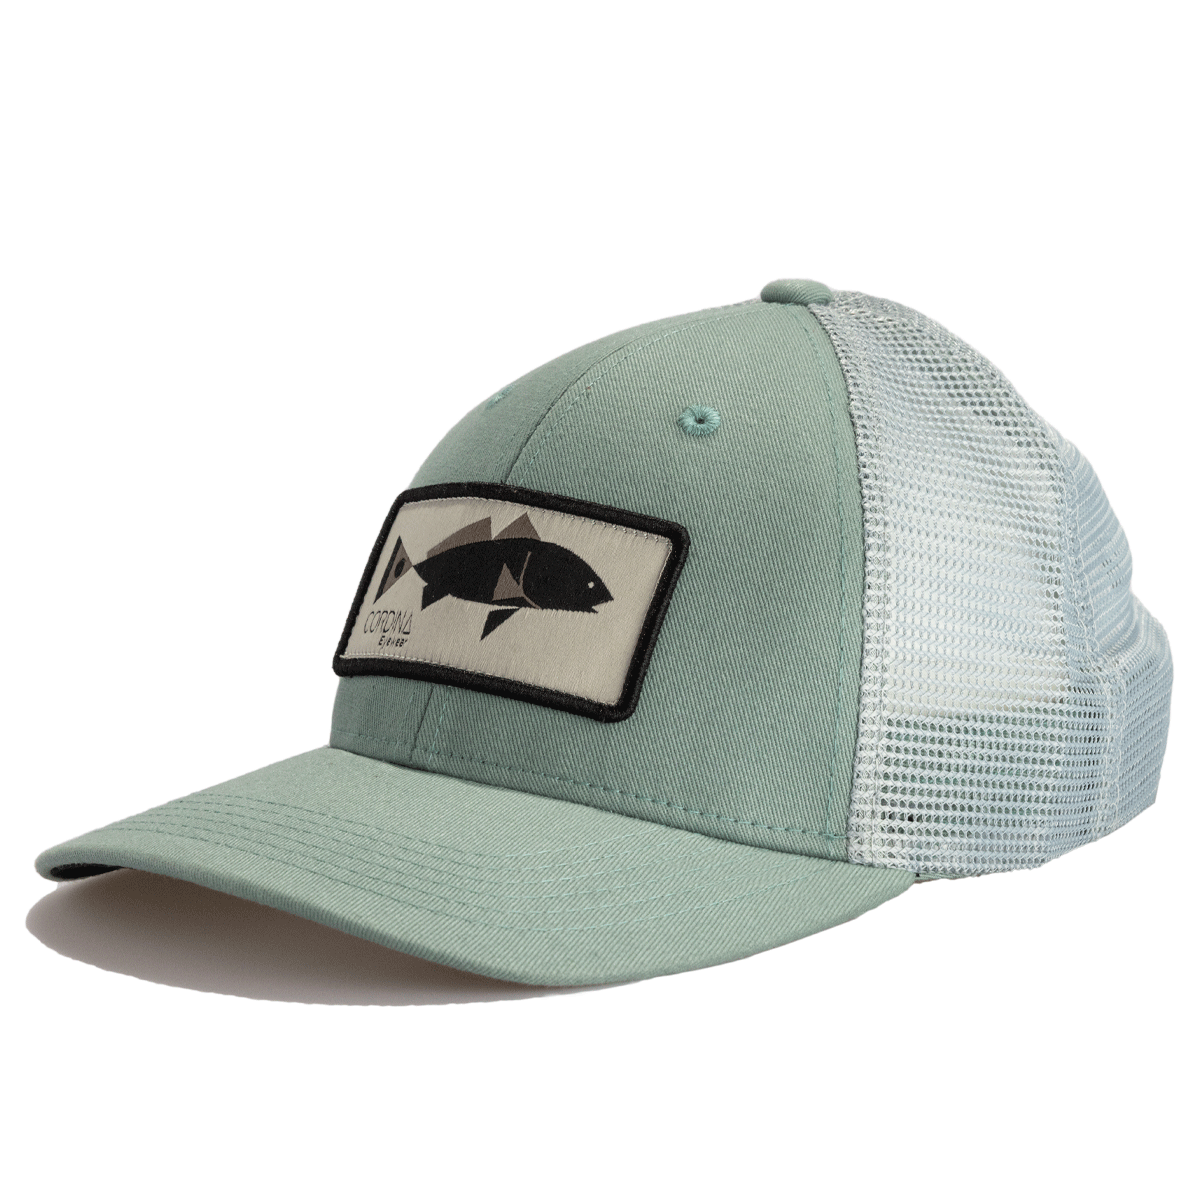 REDFISH Sport Cap Fishing Hat Embroidered Fish Adjustable GREEN AG27